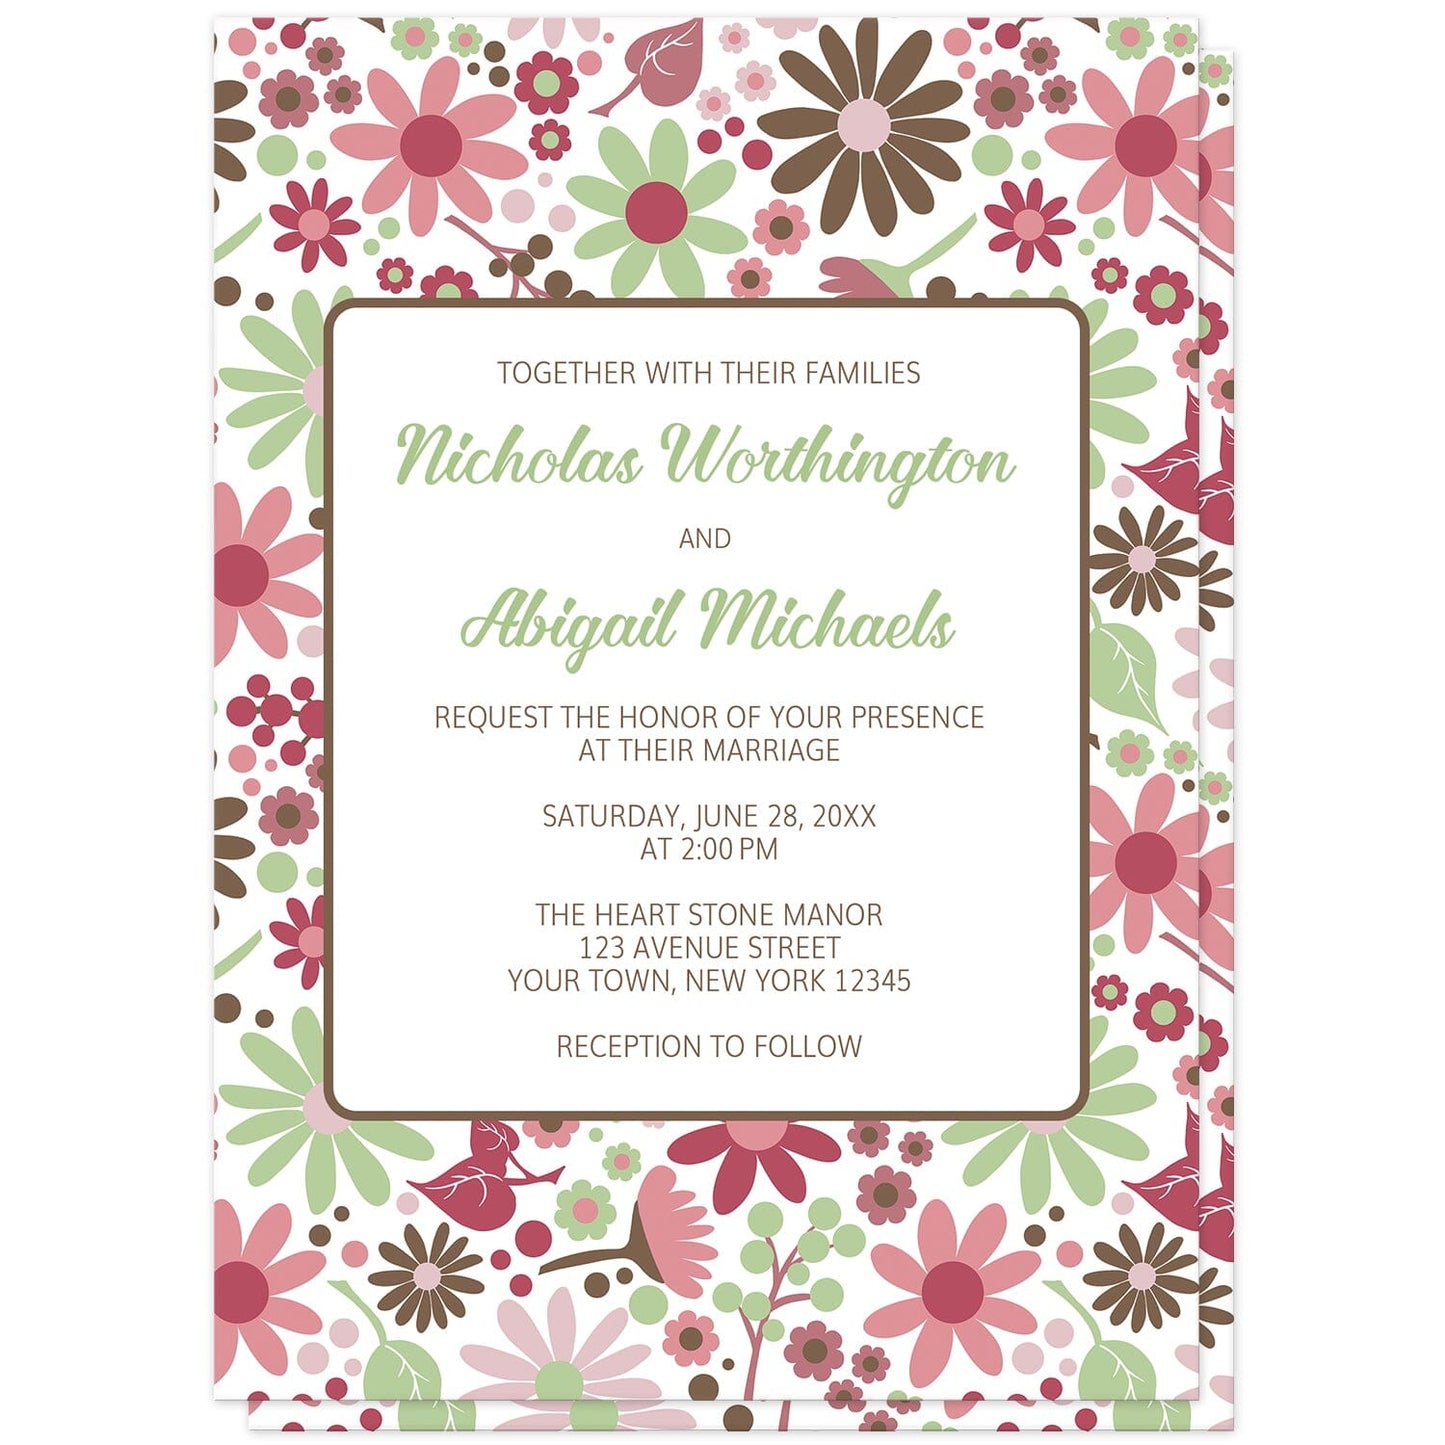 Berry Green Summer Flowers Wedding Invitations (front) at Artistically Invited. Beautiful berry green summer flowers wedding invitations designed with a pretty summer floral pattern in different hues of berry pink with green and brown. Personalize these invitations with your marriage occasion details. They're a gorgeous option for any couple who loves floral designs as they're covered in this flowers pattern on both the front and back of the invitations. 